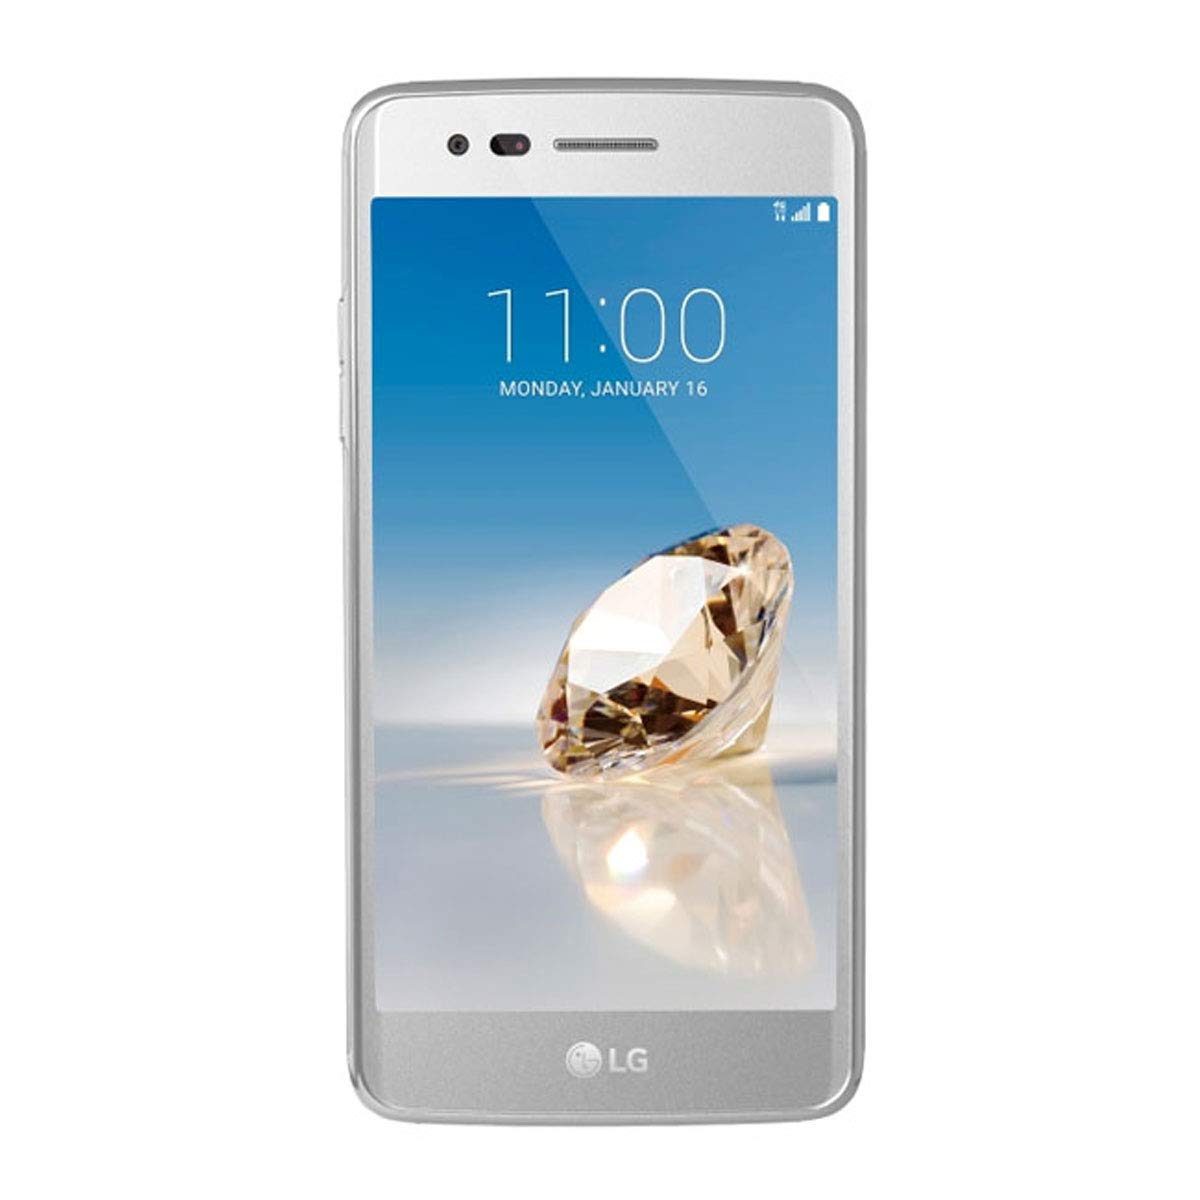 LG Aristo MS210 | 16GB, 1.5GB RAM | 4G LTE | 13MP camera W/Flash | Android OS 7.0 Nougat | Silver | - GSM Unlocked (Not compatible on metroPCS)